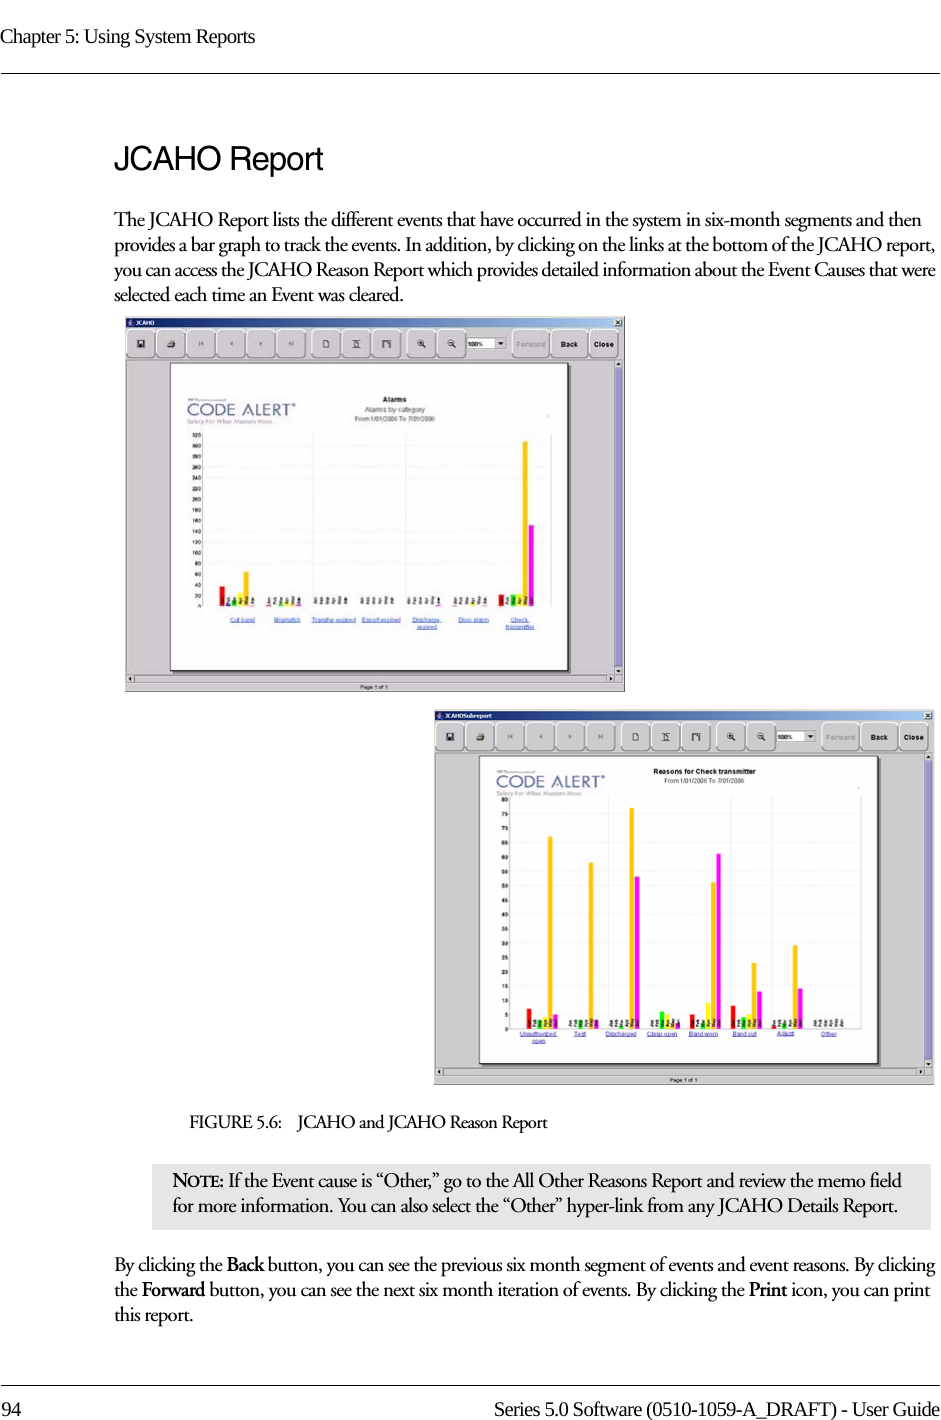 Chapter 5: Using System Reports94 Series 5.0 Software (0510-1059-A_DRAFT) - User GuideJCAHO ReportThe JCAHO Report lists the different events that have occurred in the system in six-month segments and then provides a bar graph to track the events. In addition, by clicking on the links at the bottom of the JCAHO report, you can access the JCAHO Reason Report which provides detailed information about the Event Causes that were selected each time an Event was cleared.FIGURE 5.6:    JCAHO and JCAHO Reason ReportBy clicking the Back button, you can see the previous six month segment of events and event reasons. By clicking the Forward button, you can see the next six month iteration of events. By clicking the Print icon, you can print this report.NOTE: If the Event cause is “Other,” go to the All Other Reasons Report and review the memo field for more information. You can also select the “Other” hyper-link from any JCAHO Details Report.